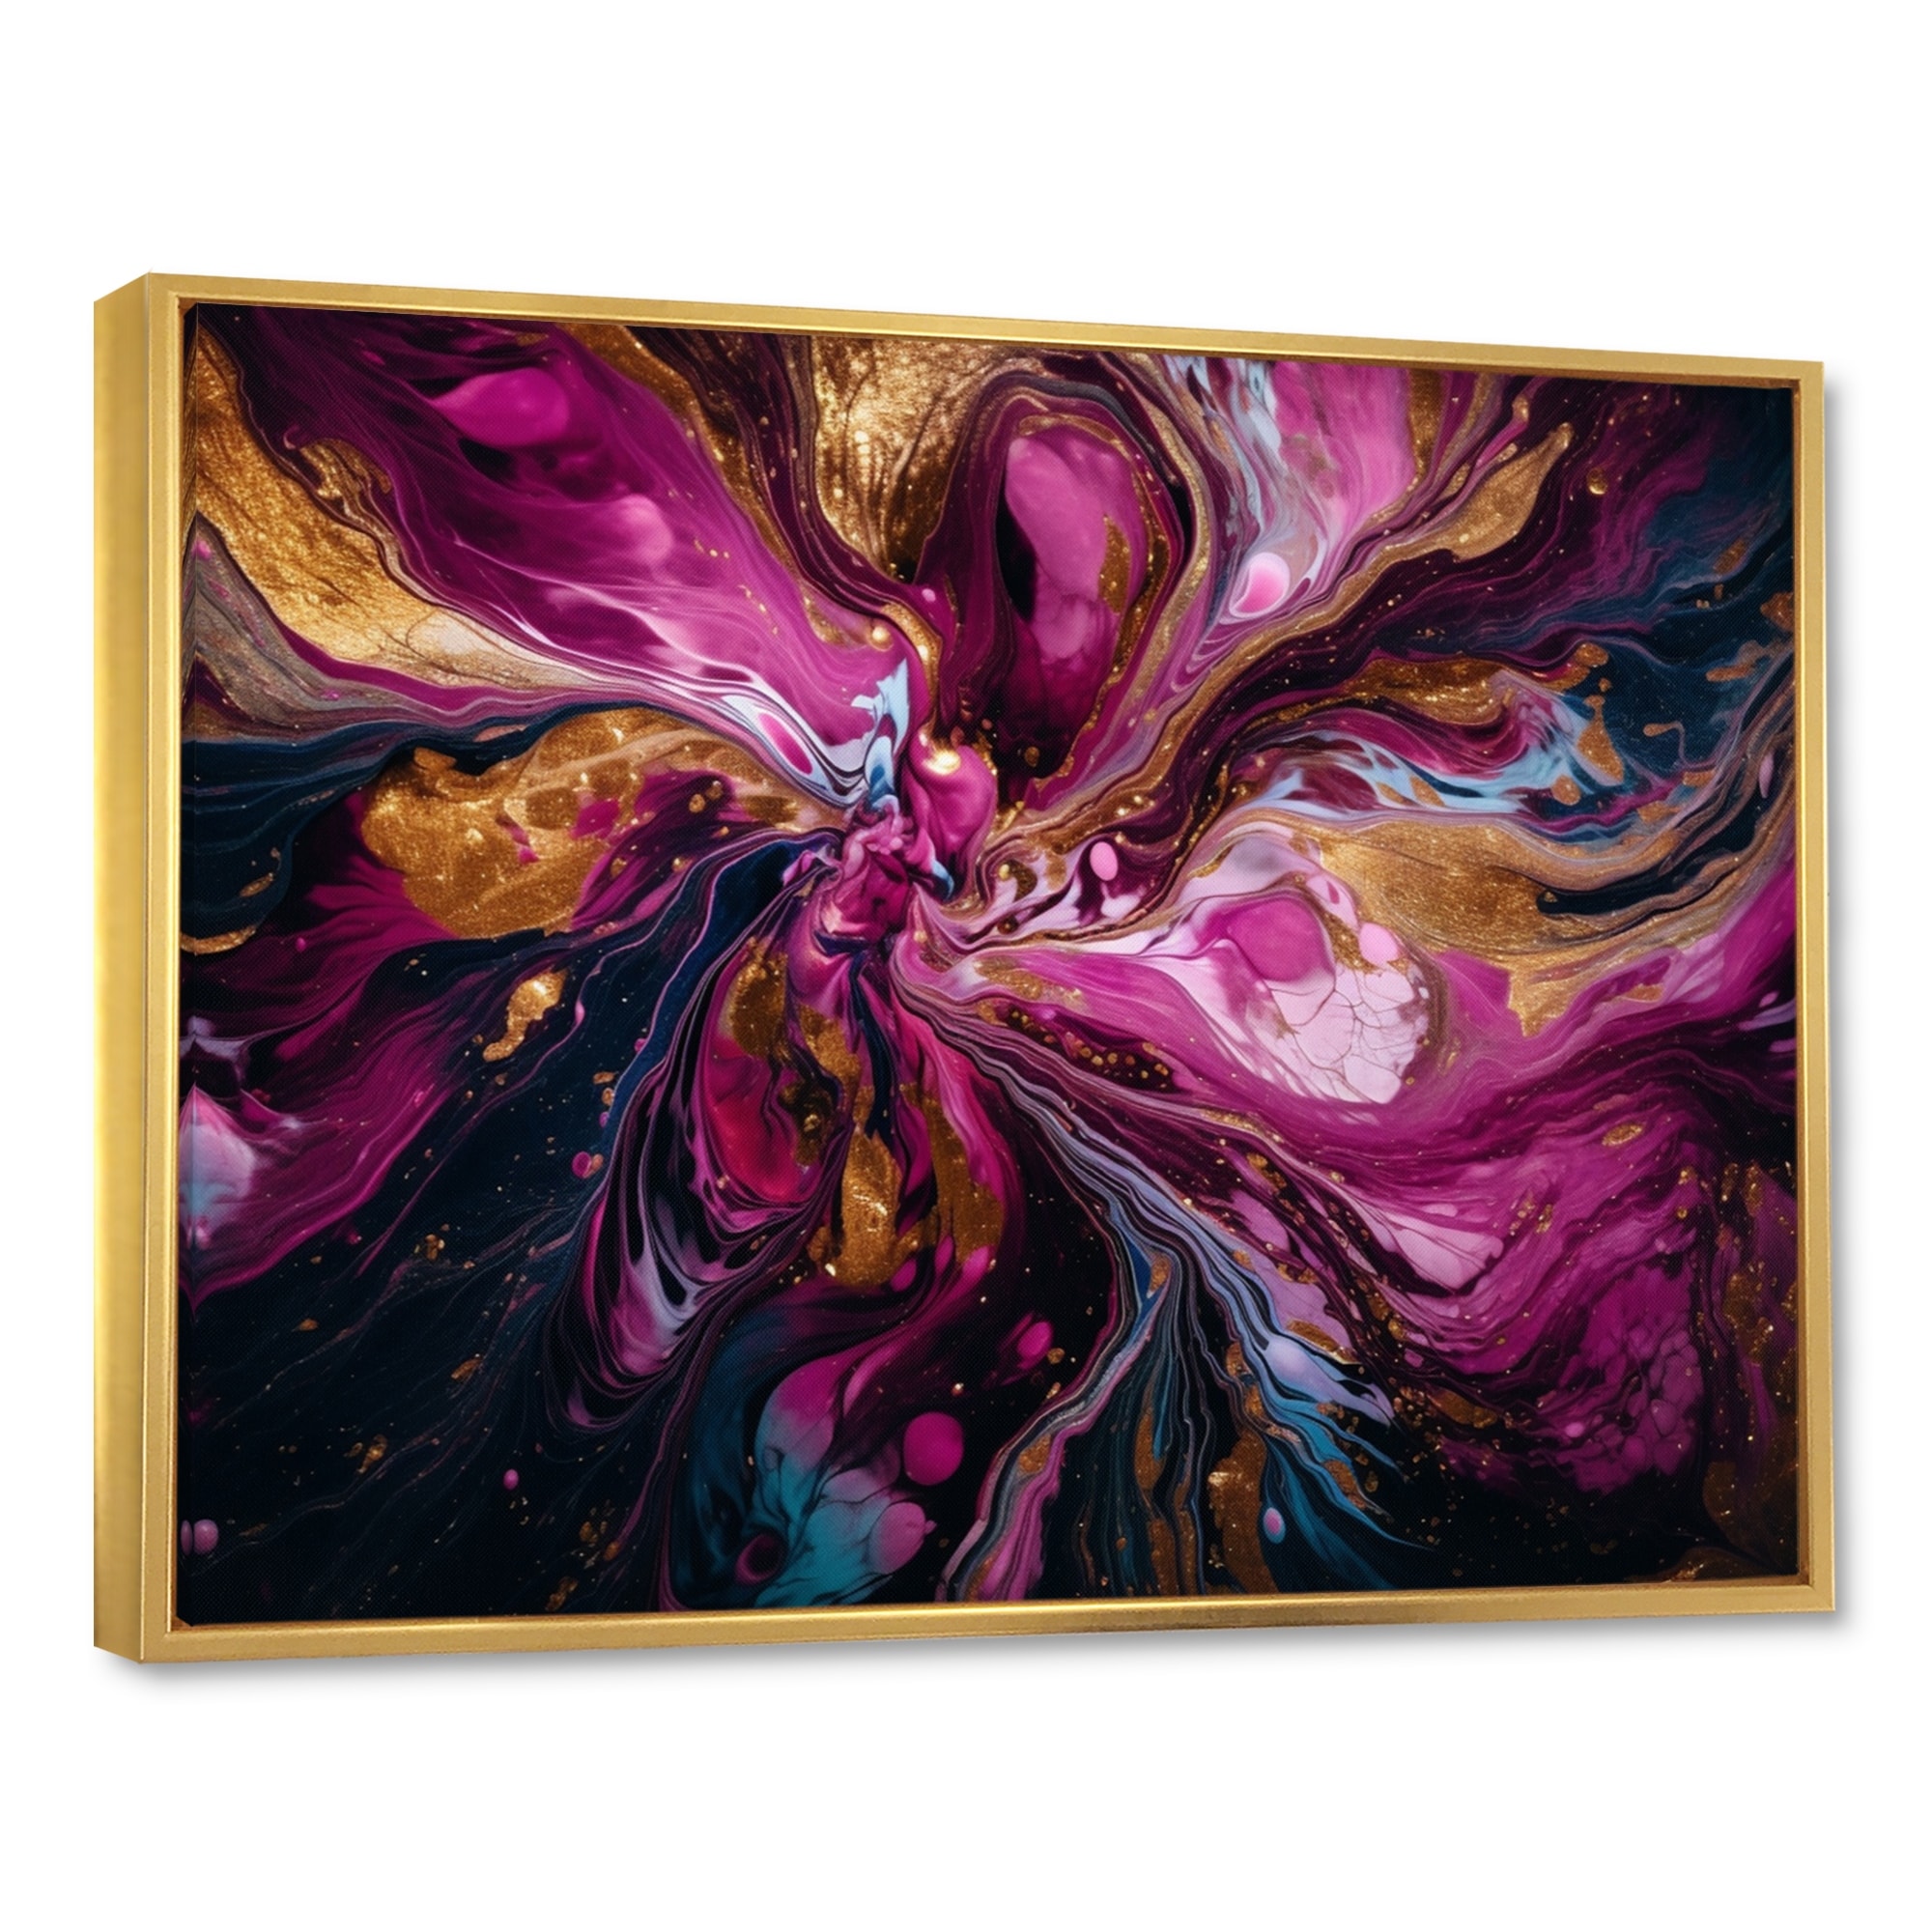 Designart "The Essence Of Fluidity Ii" Abstract Liquid Ink Framed Wall Art For Living Room